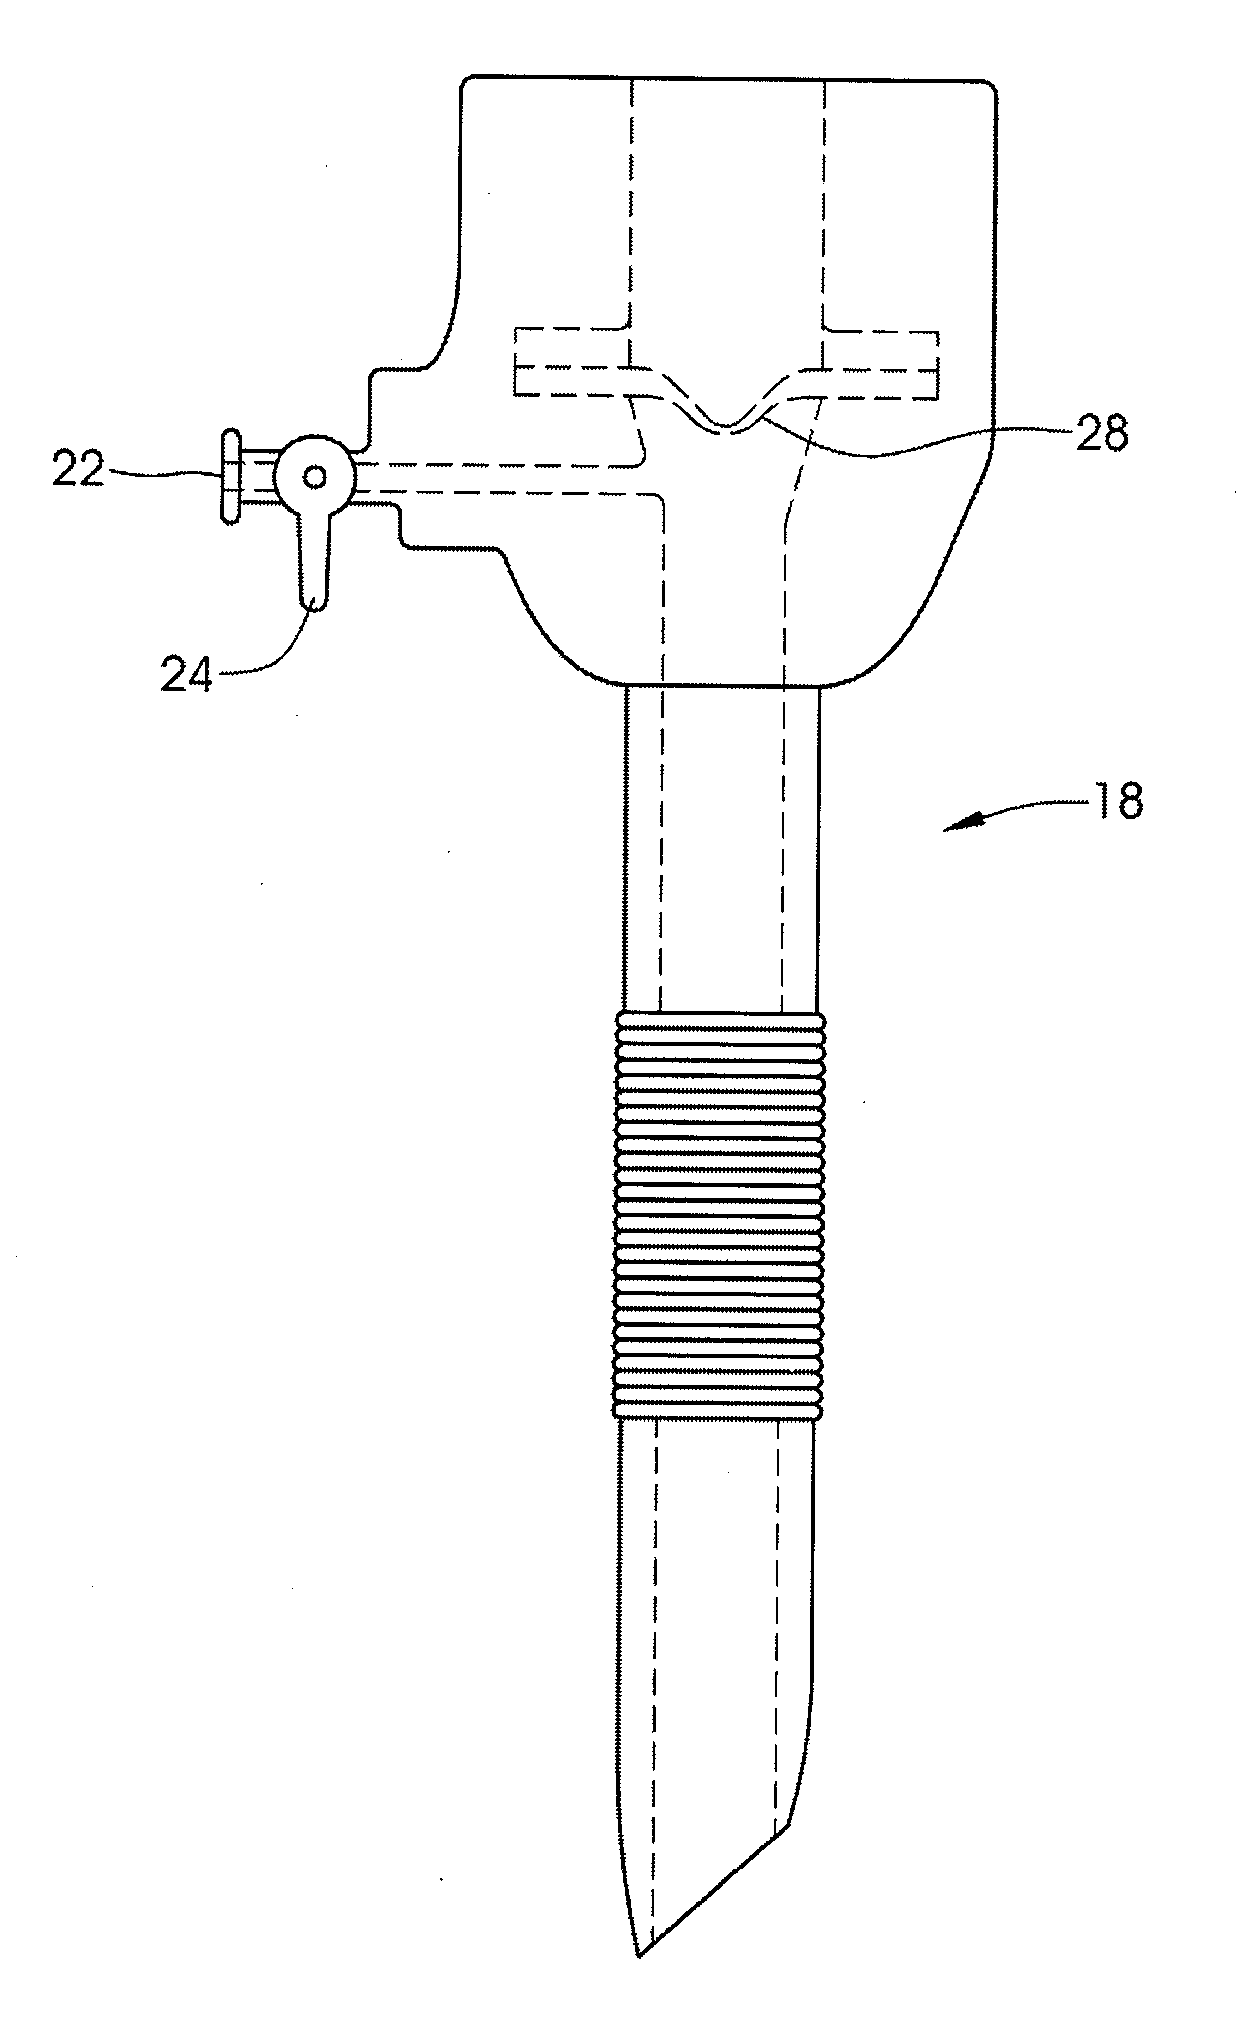 System and method for securing an implantable interface to a mammal